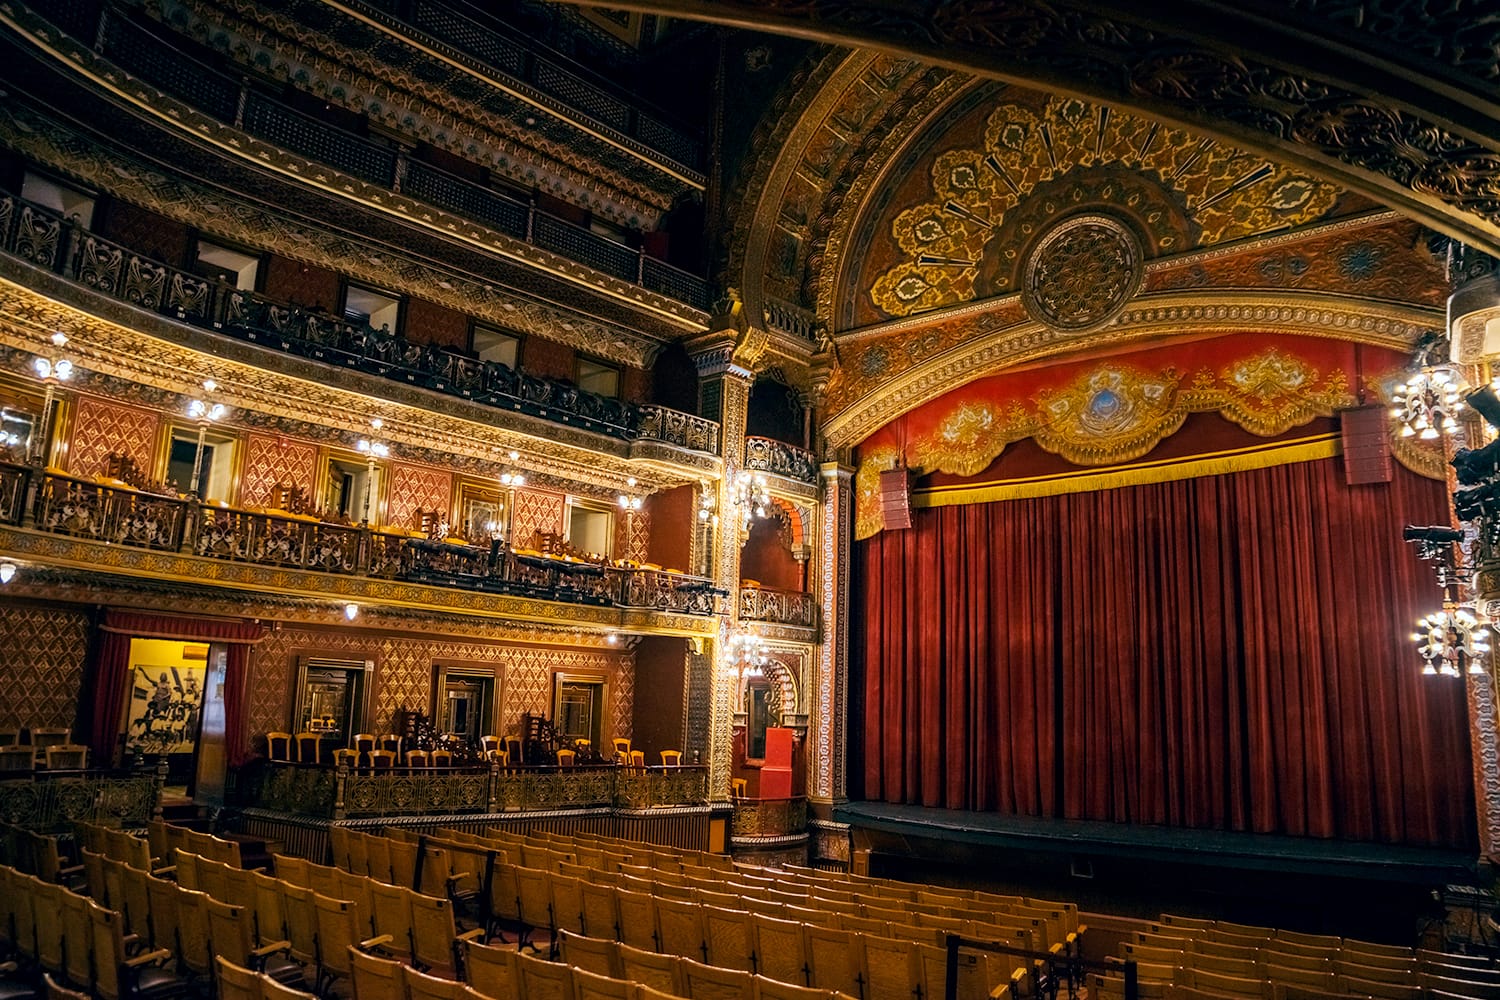 Main room and stage at Juarez Theater in Guanajuato, Mexico